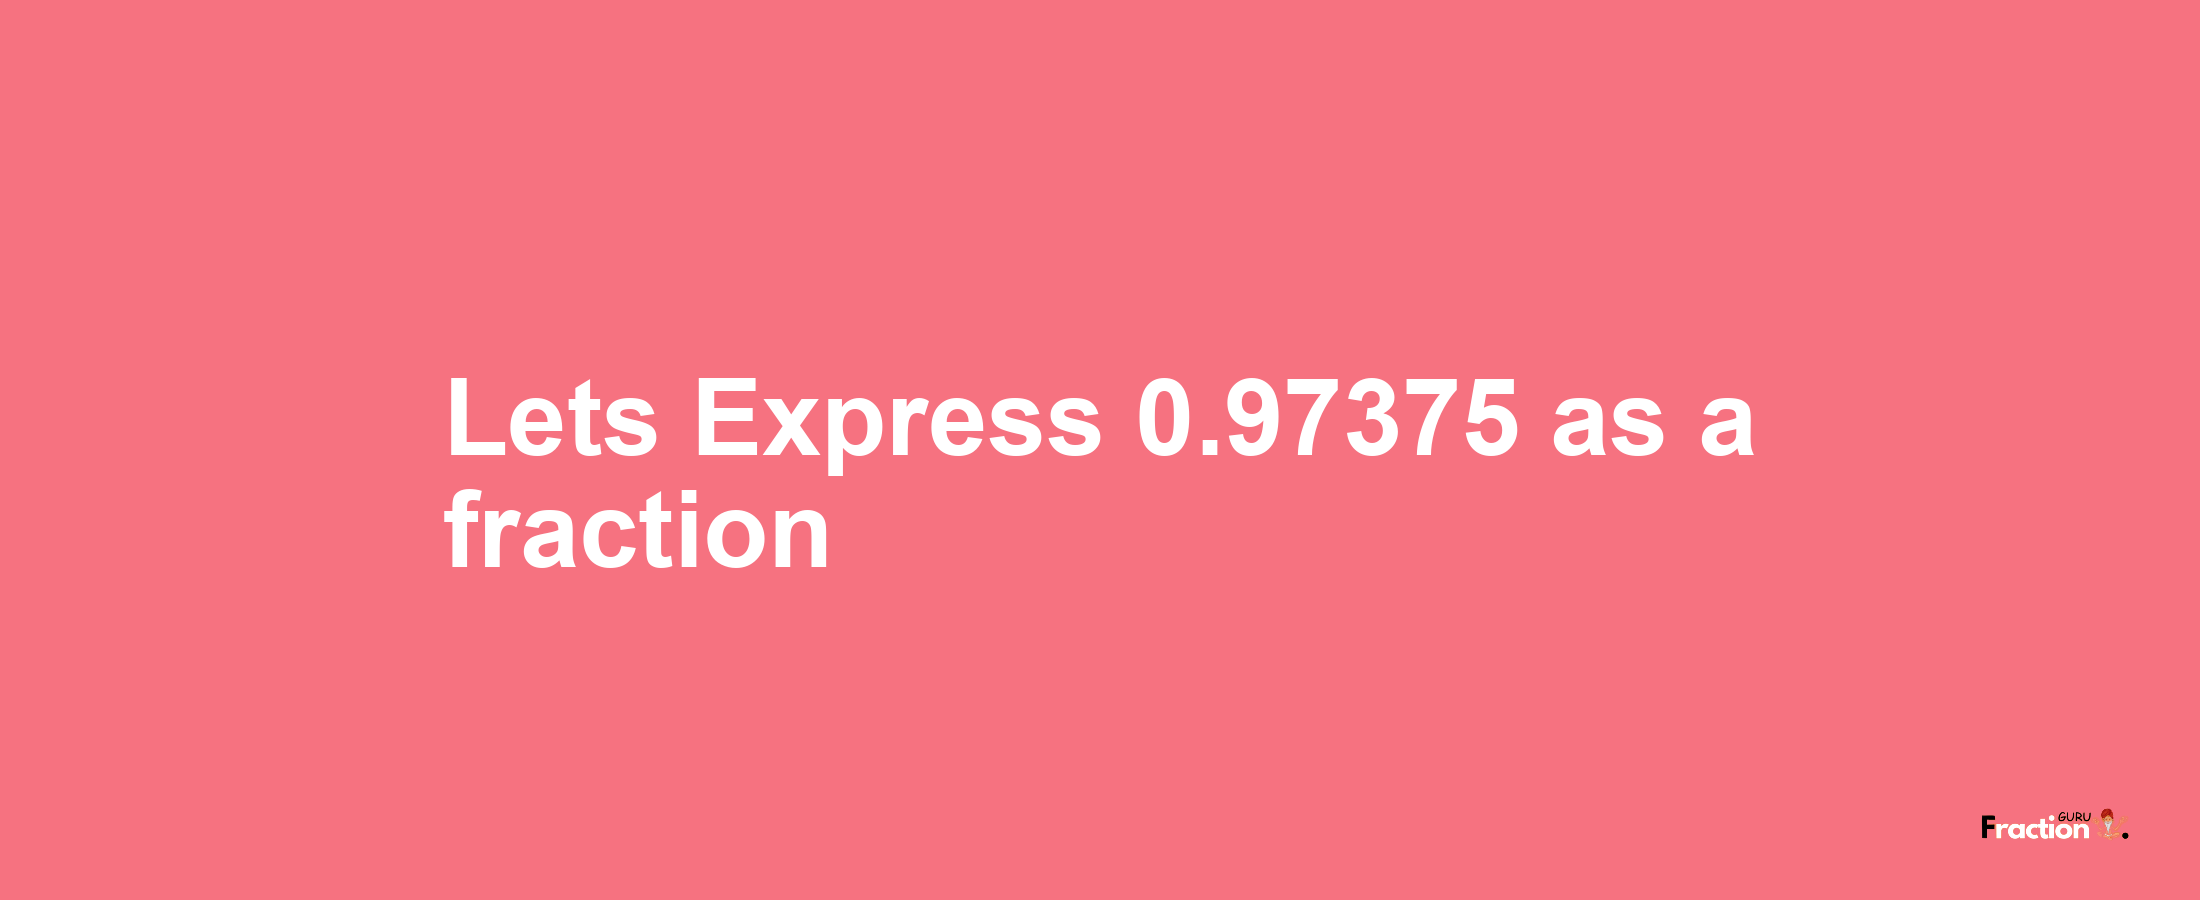 Lets Express 0.97375 as afraction